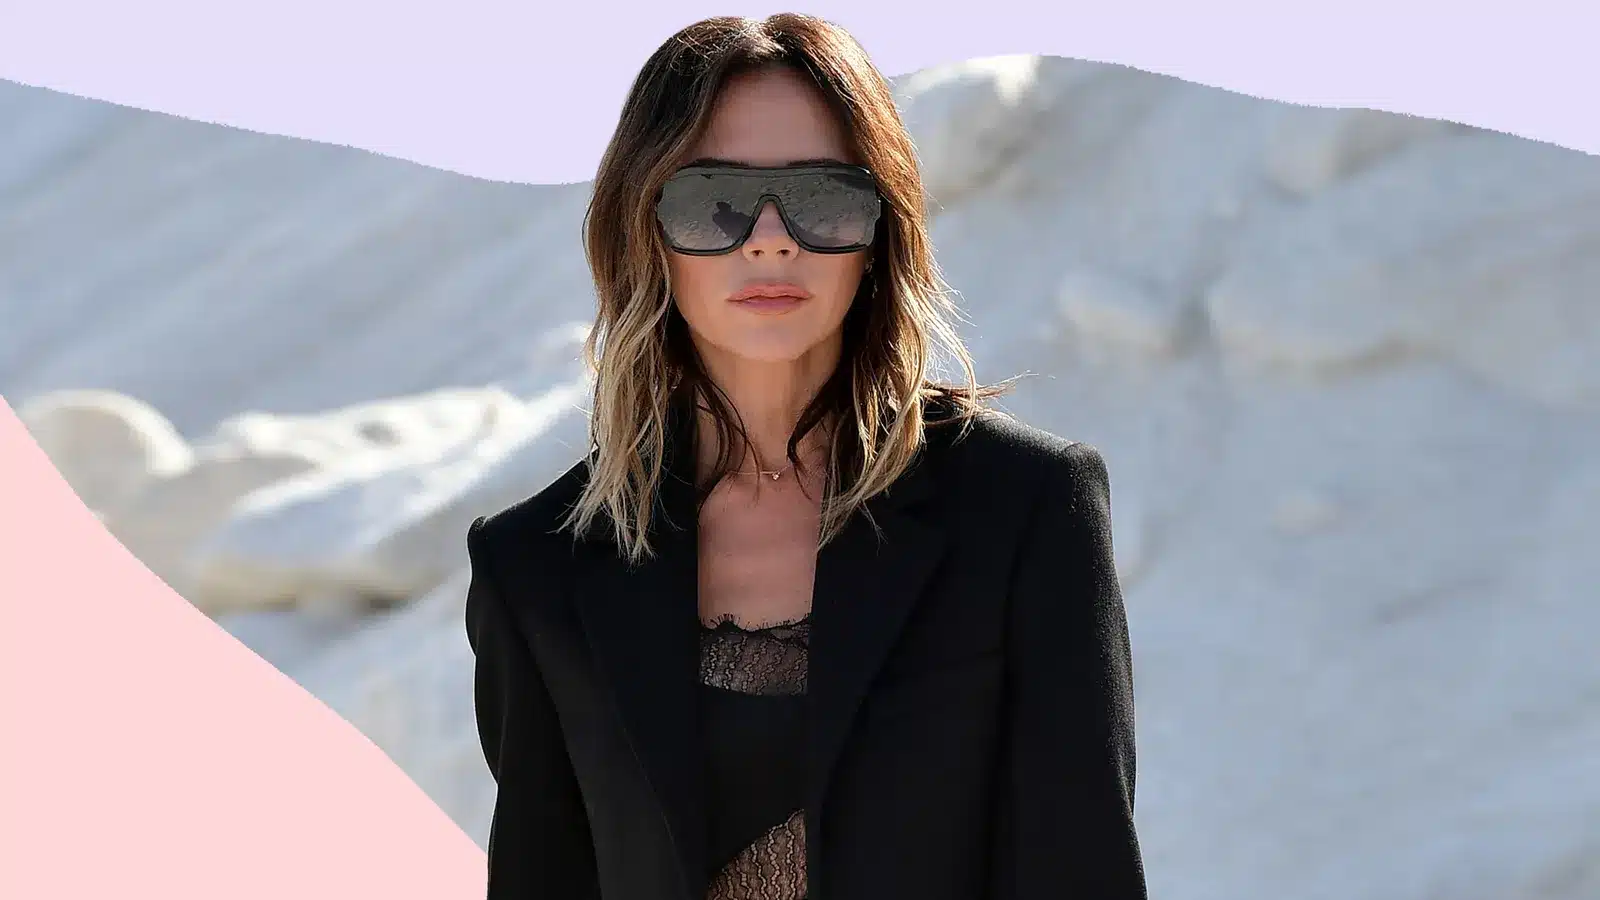 Victoria Beckham is always stylish and modern in every collection of glasses